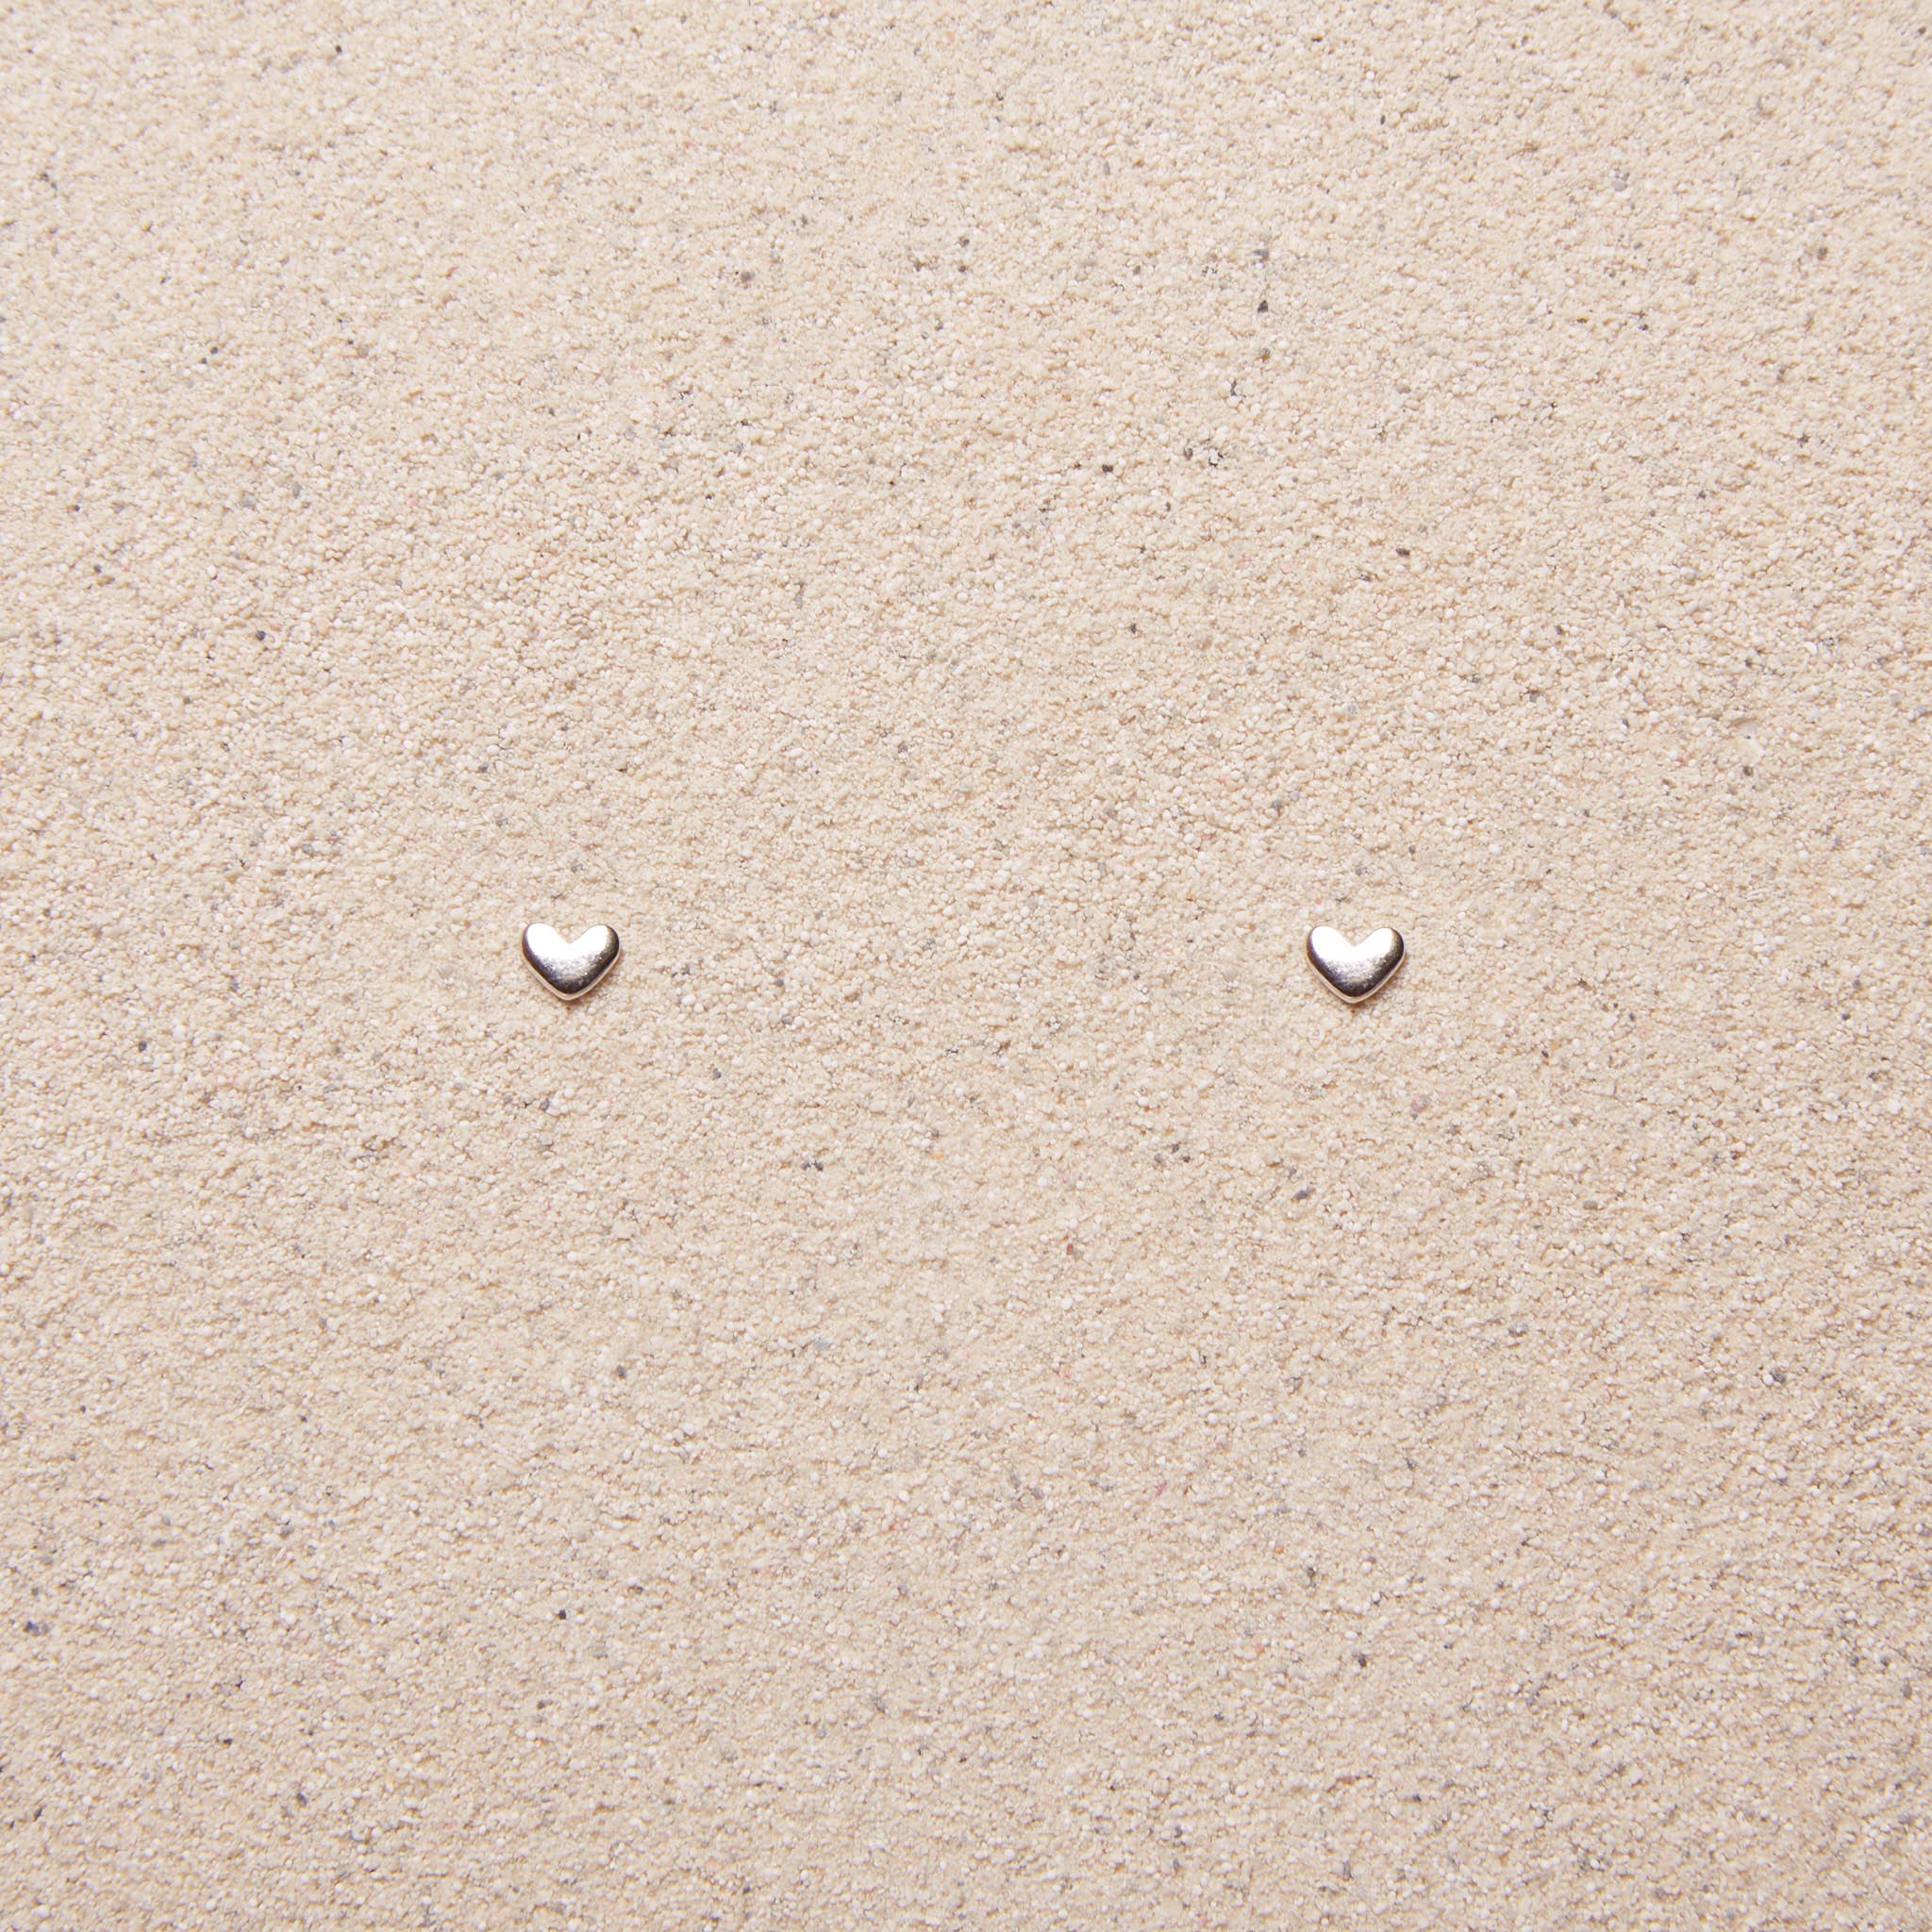 tiny silver heart earrings on a tan background